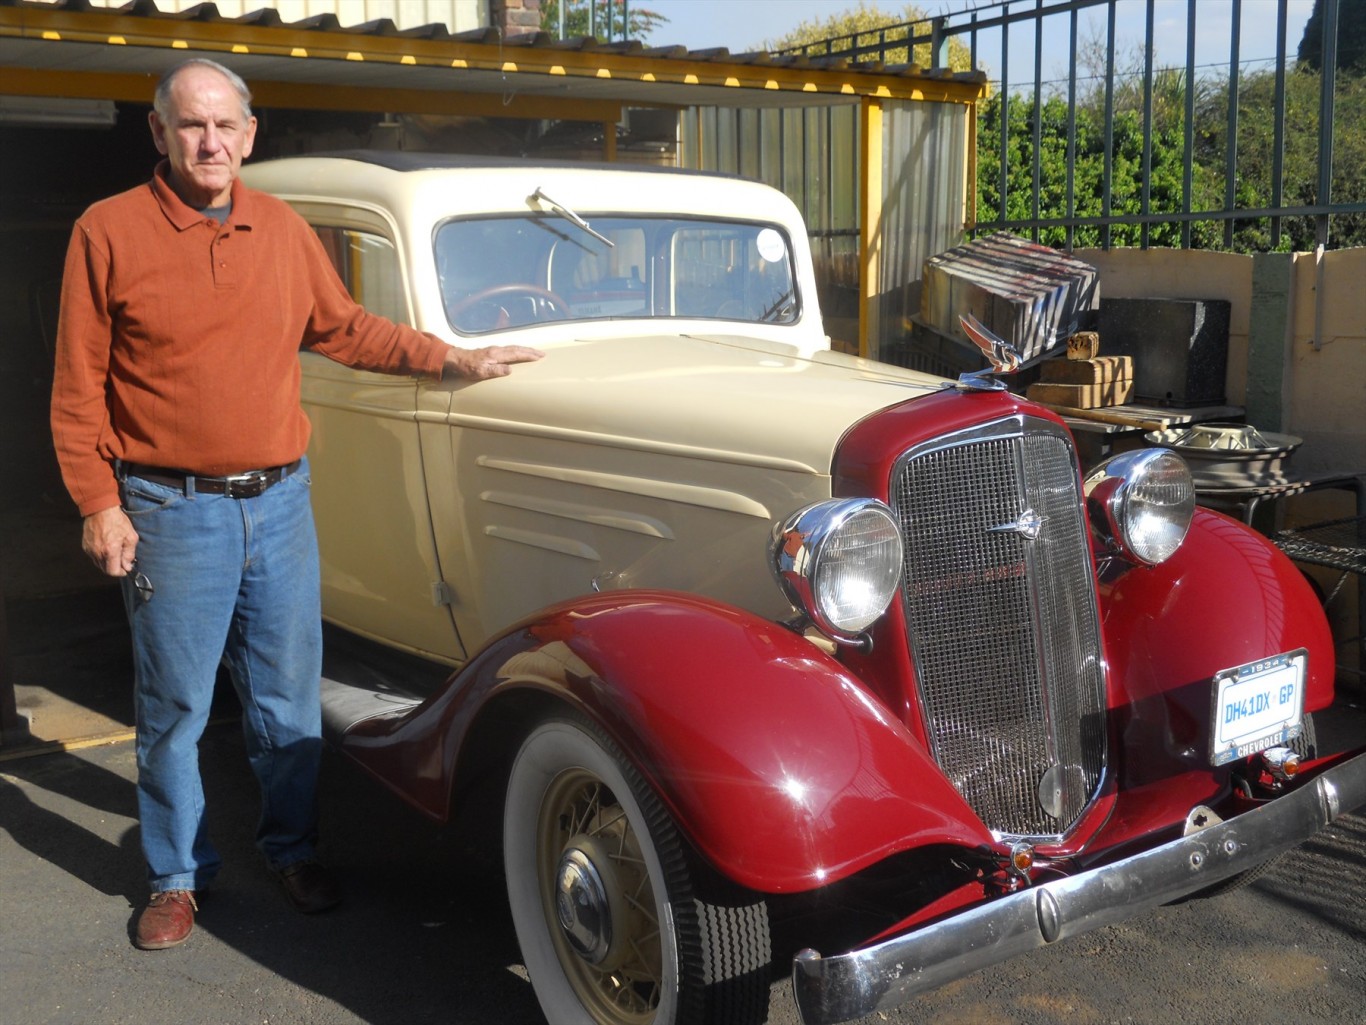 Ben van Rooyen’s 1934 Chevrolet during the filming of a US miniseries.